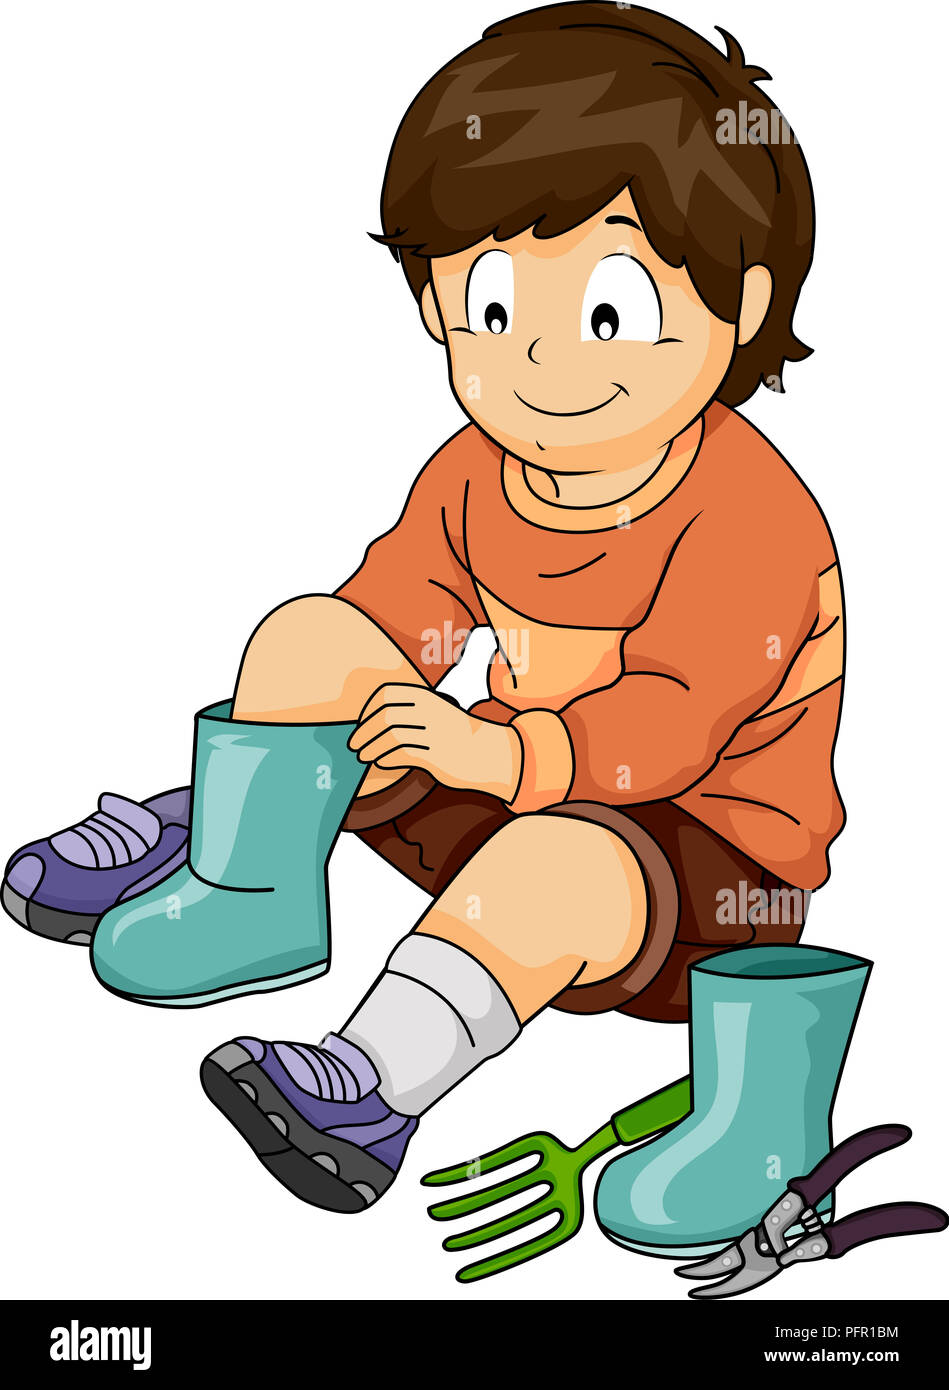 Illustration of a Kid Boy Changing into Gardening Boots with Garden ...